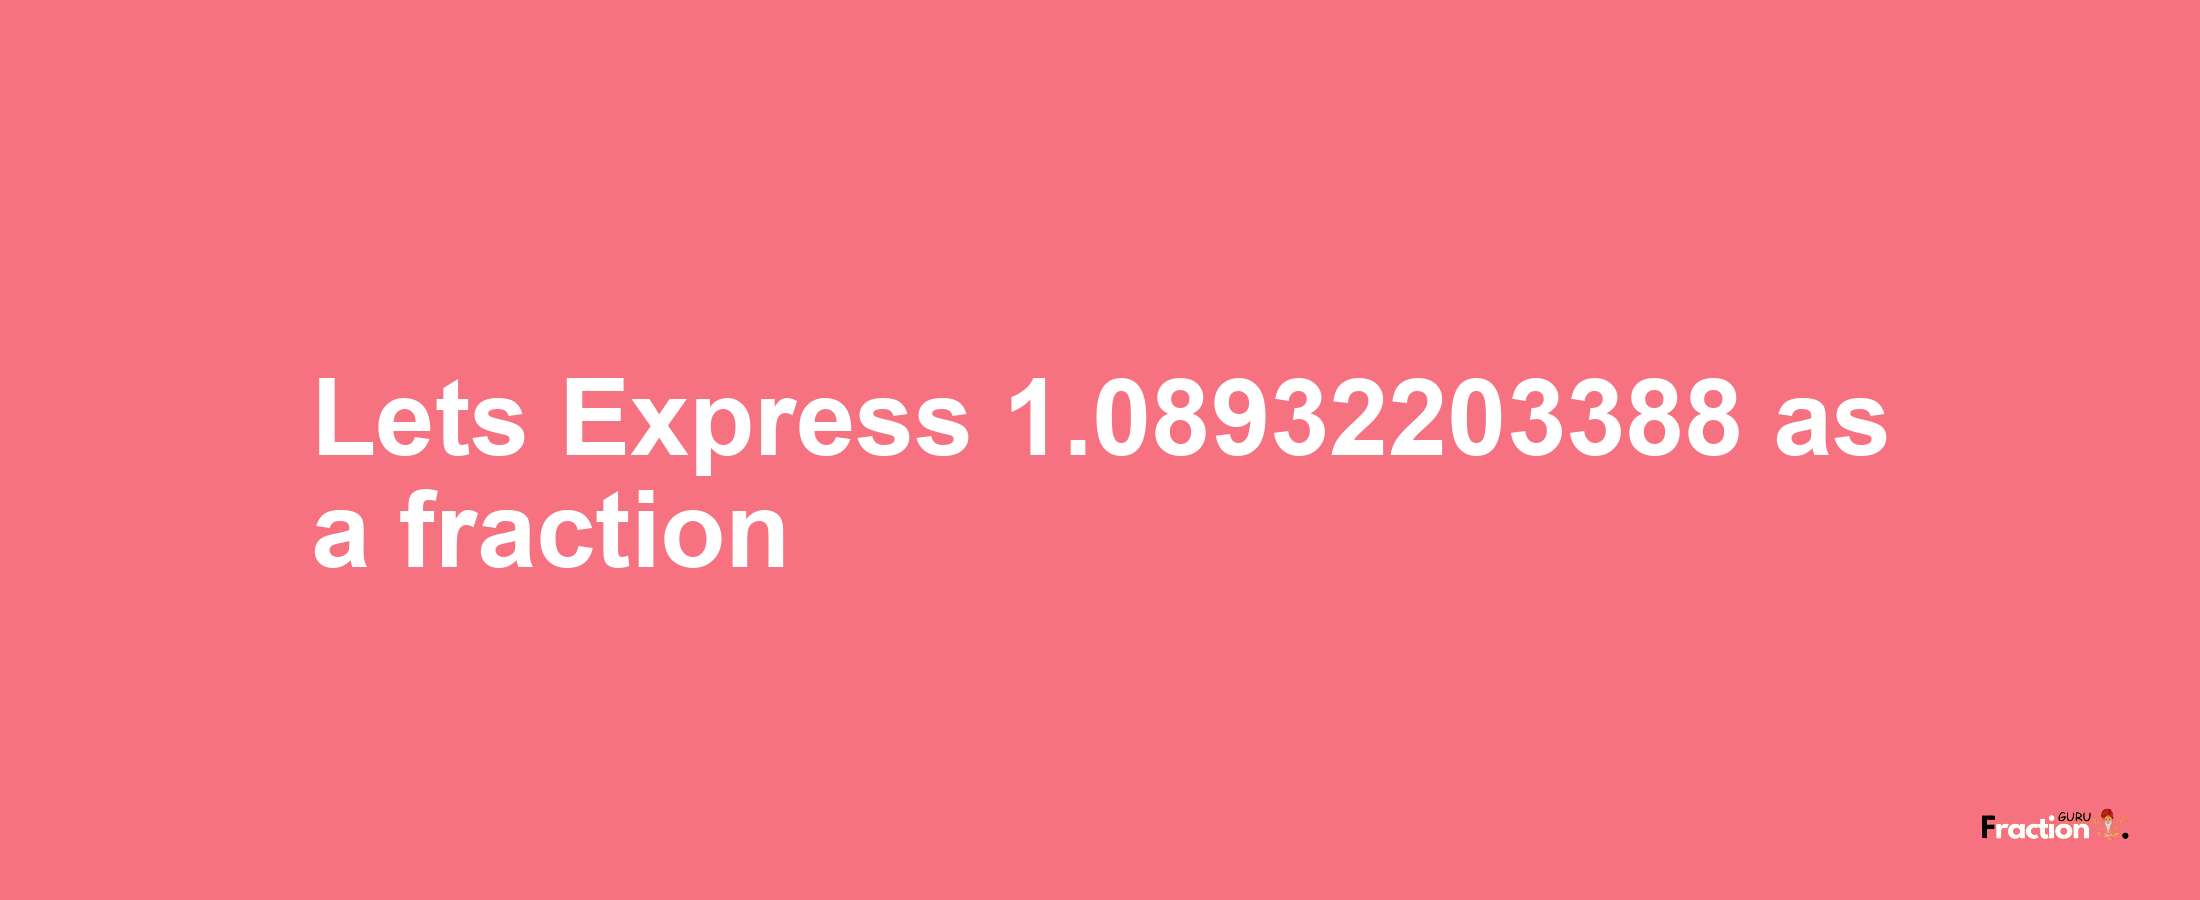 Lets Express 1.08932203388 as afraction